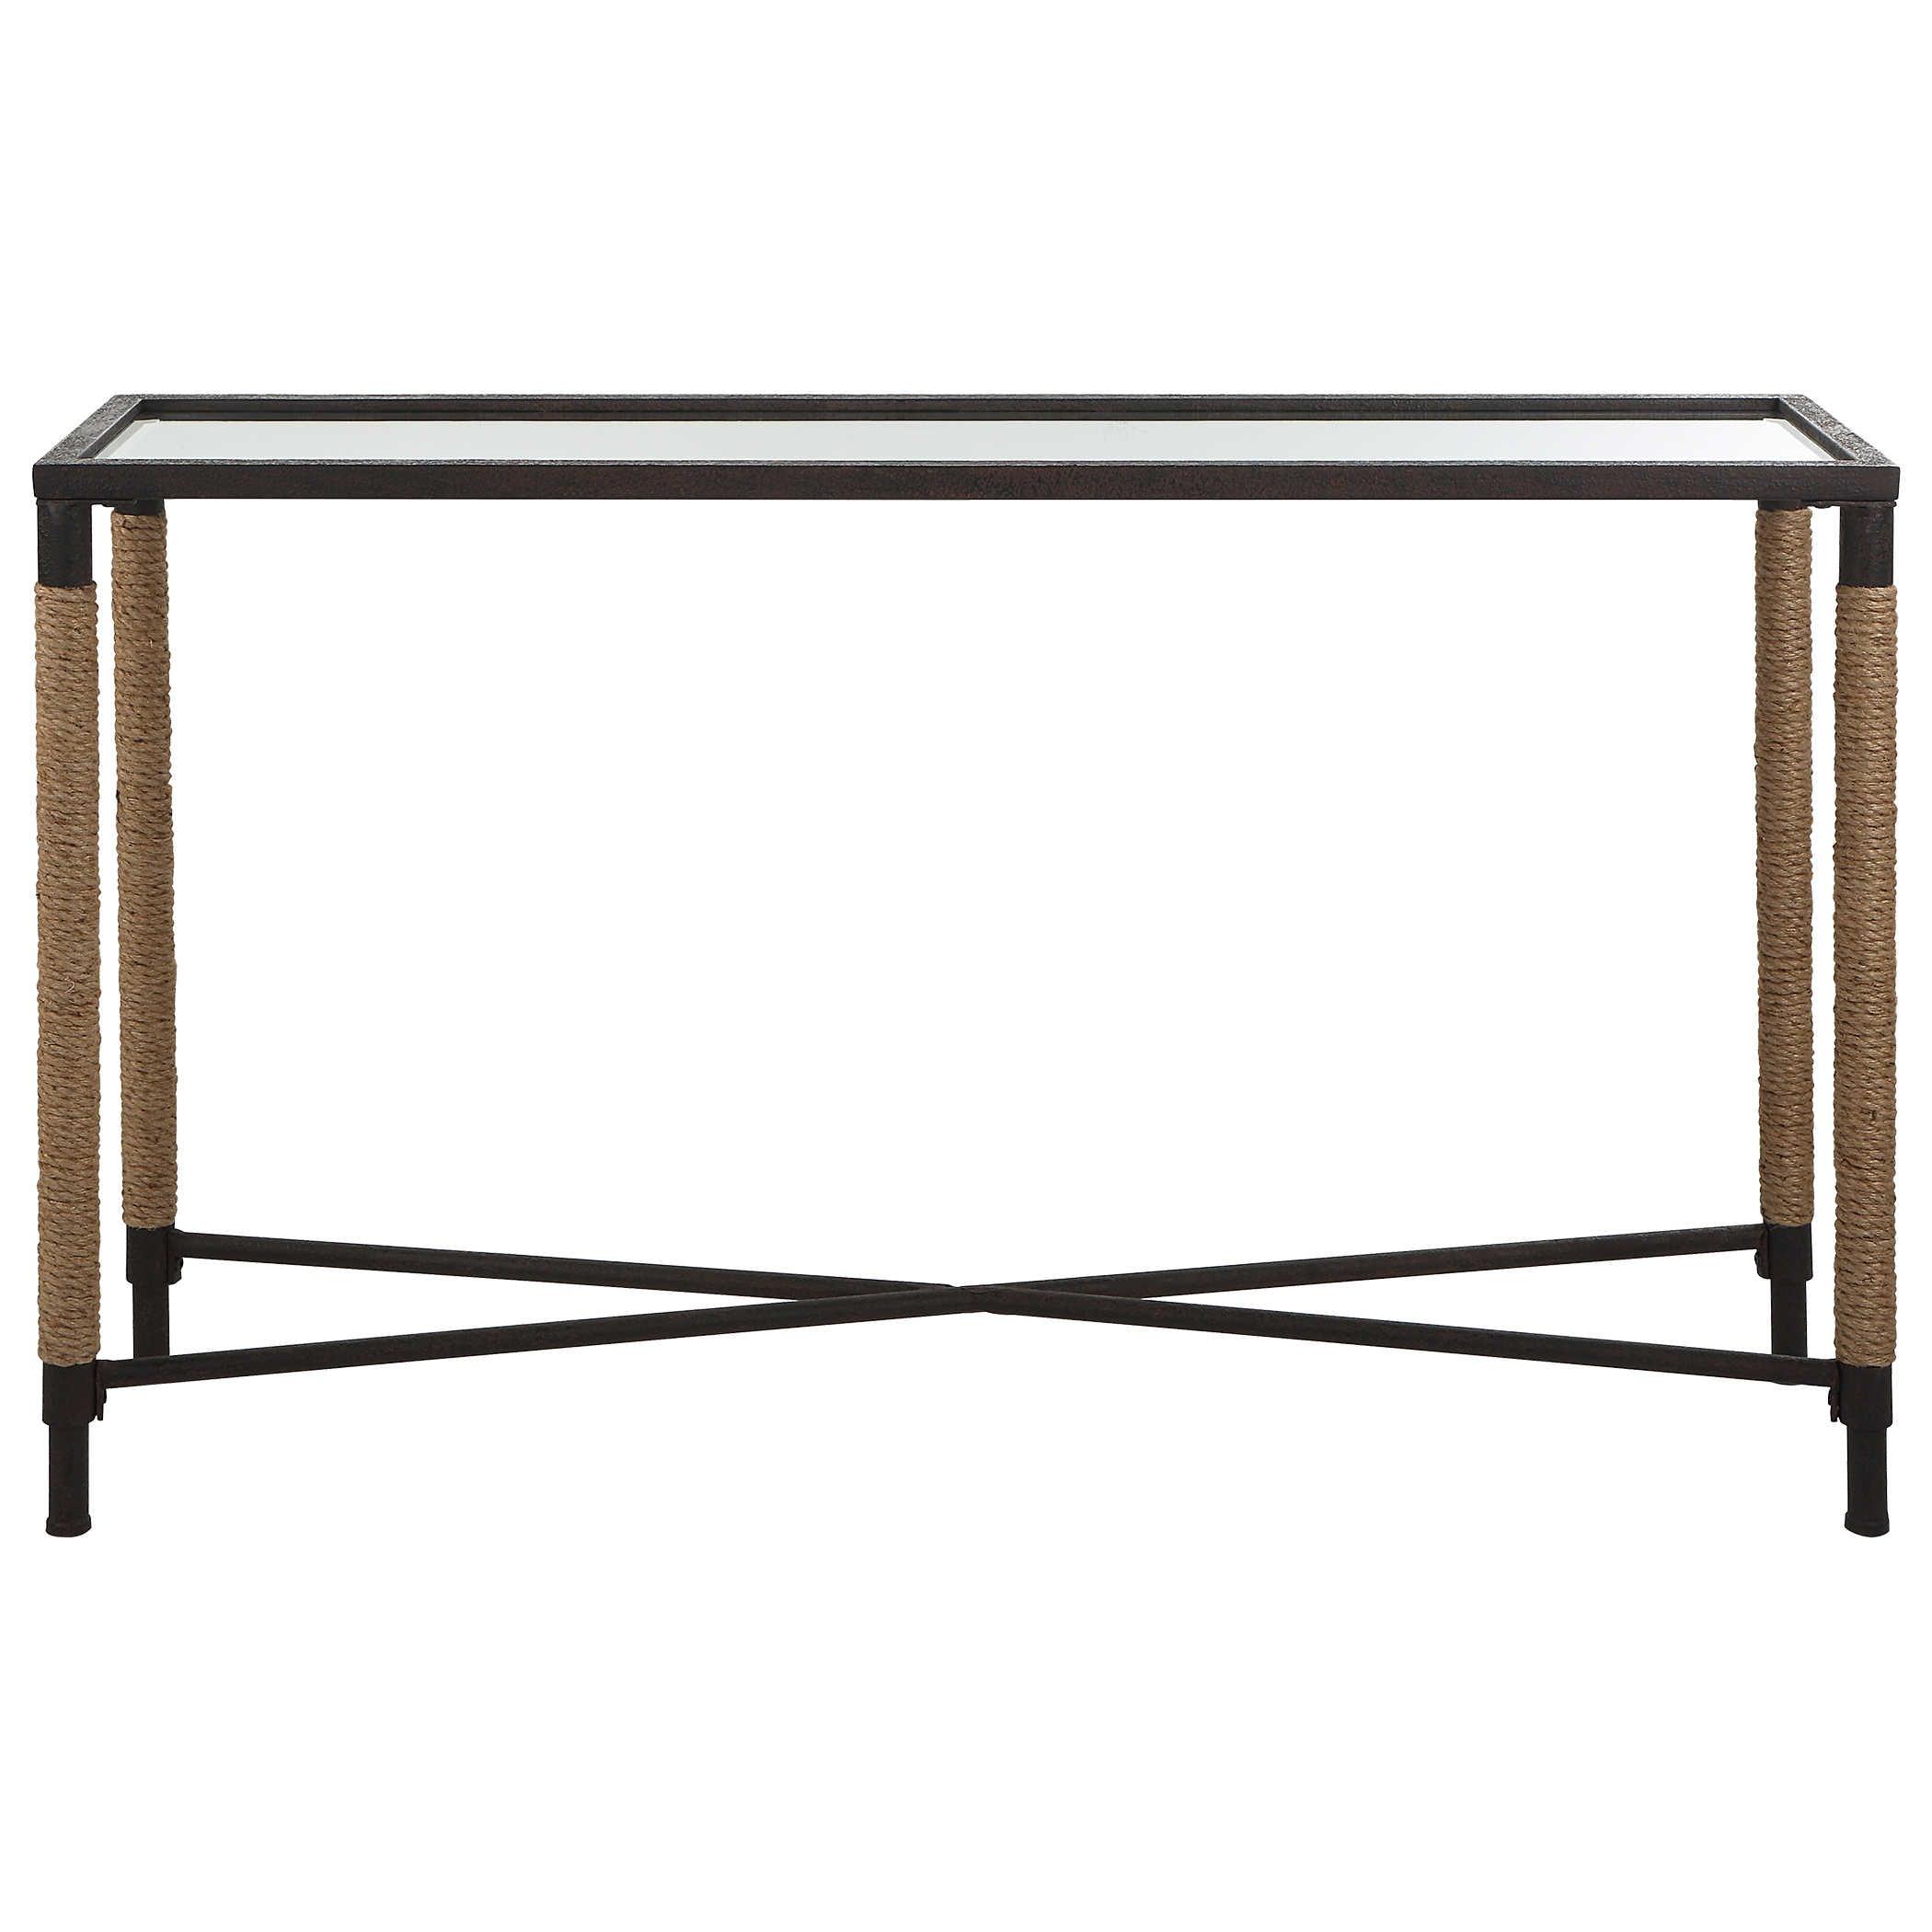 The Uttermost - Braddock Console Table - 22880 | Montreal Lighting & Hardware